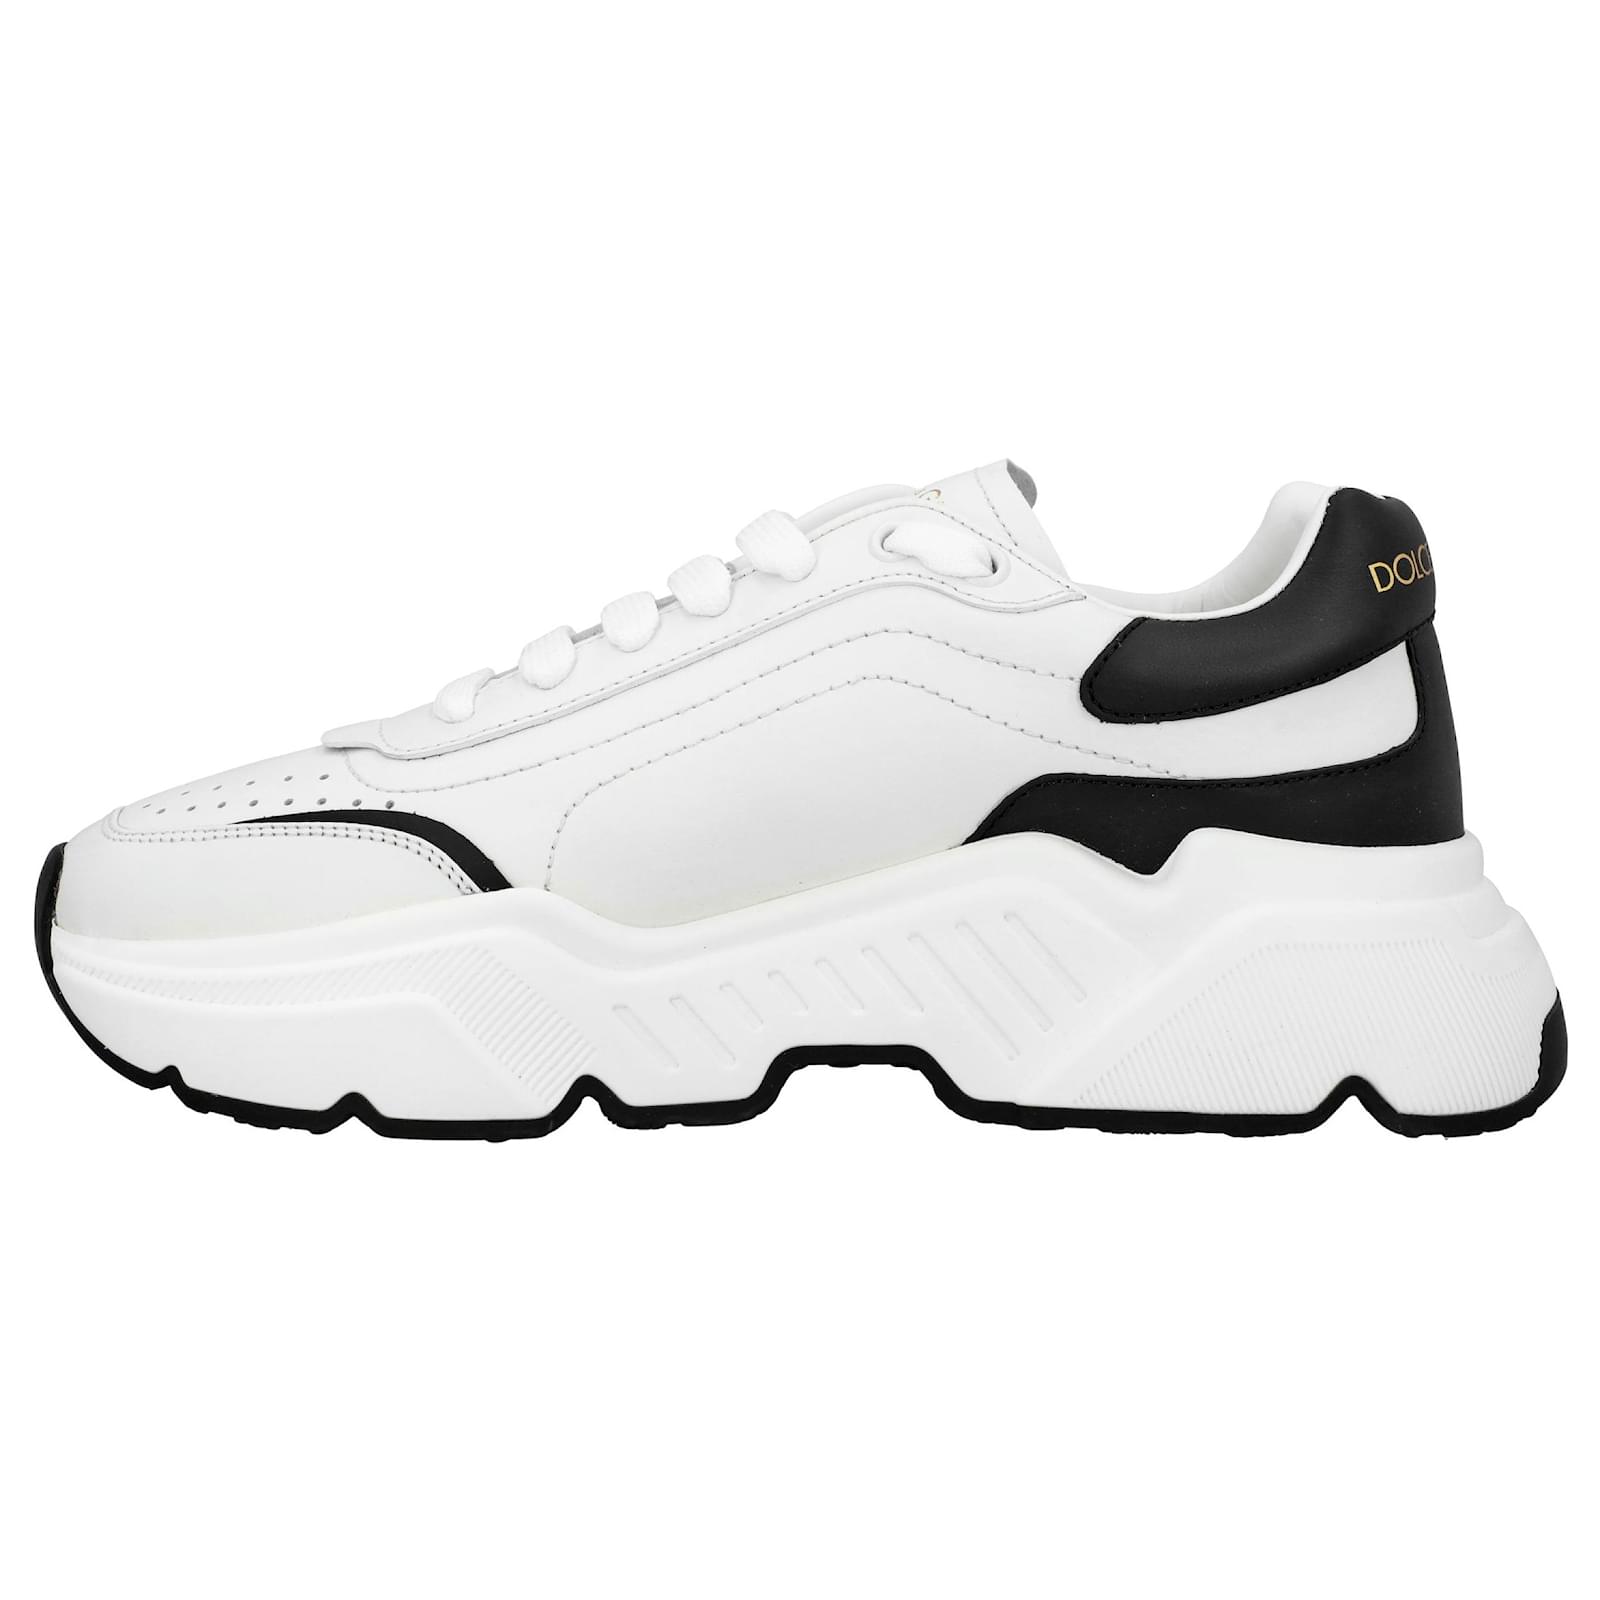 Dolce & Gabbana Daymaster Sneakers in Nappa calf leather in white Pony ...